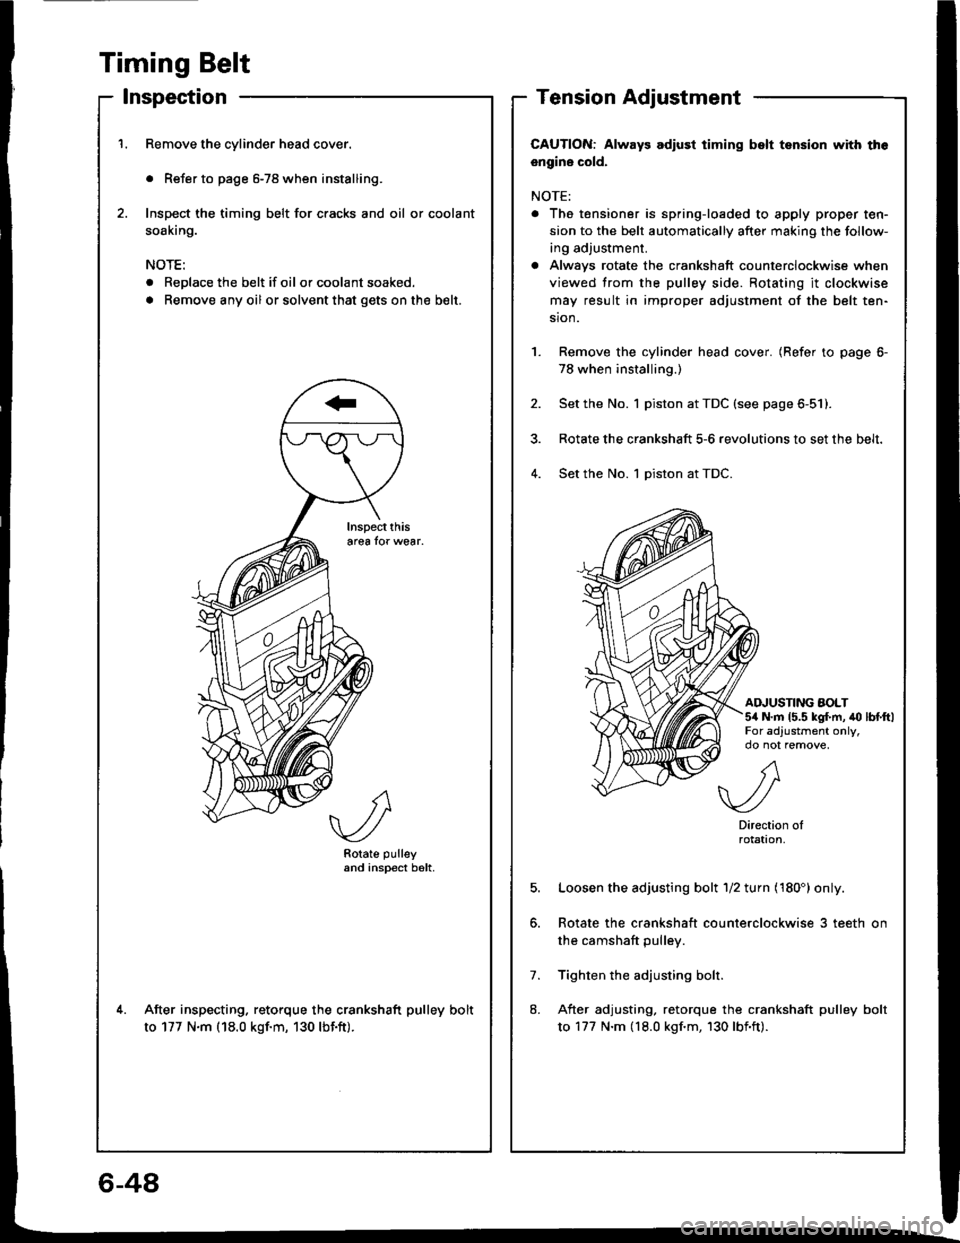 ACURA INTEGRA 1994  Service Repair Manual Timing Belt
lnspection
Remove the cylinder head cover.
. Refer to page 6-78 when installing.
Inspect the timing belt for cracks and oil or coolant
soaking.
NOTE:
. Replace the belt if oil or coolant s